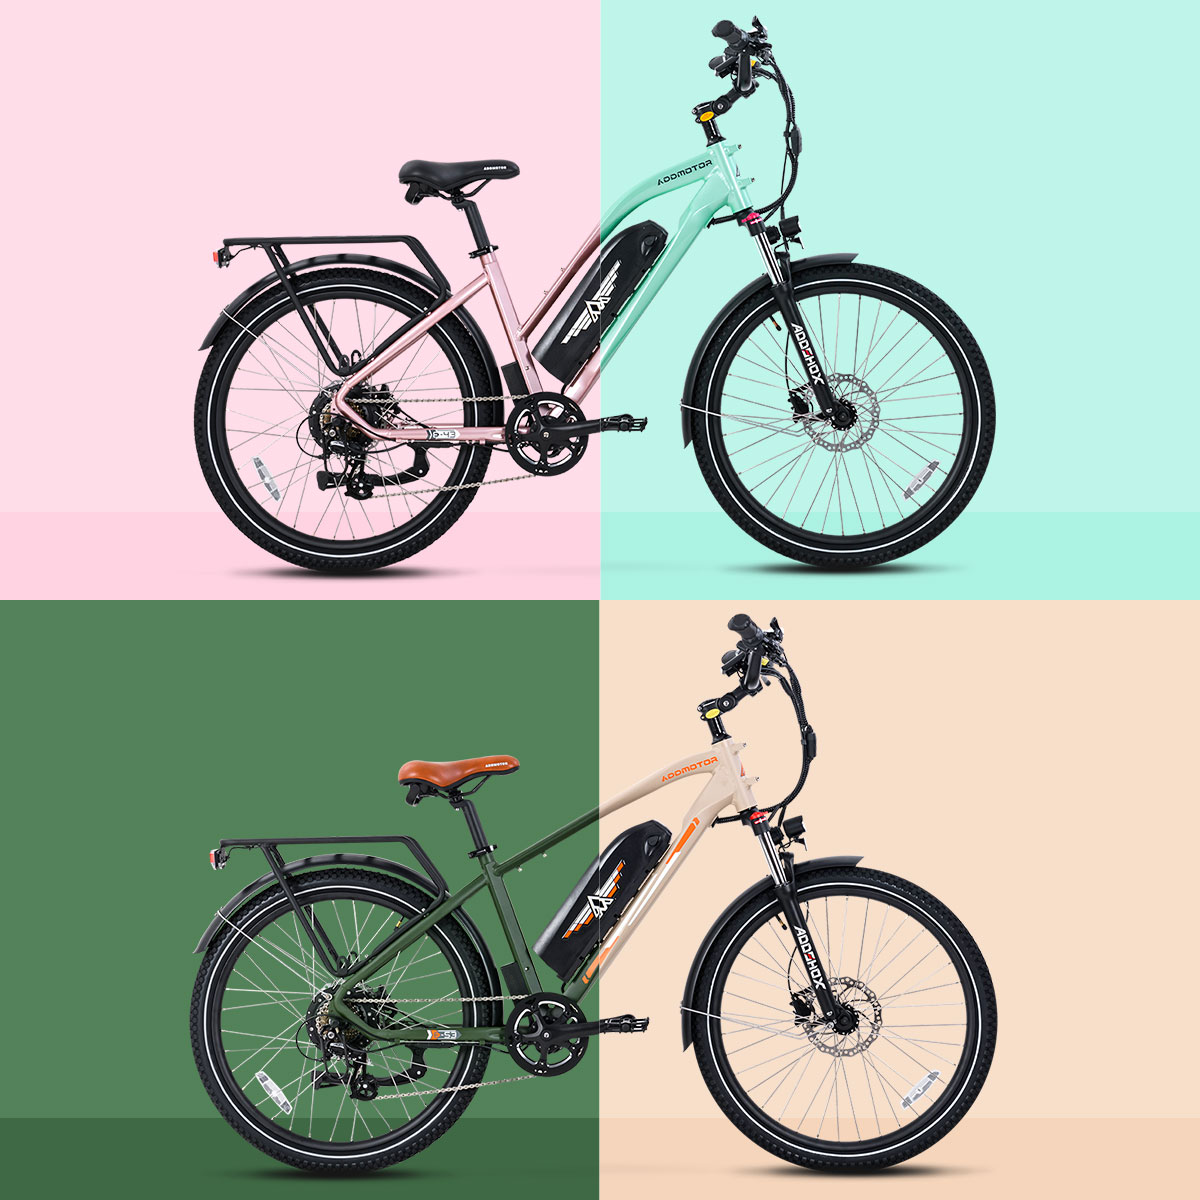 2022 New Ride-Addmotor CITYPRO E-Series Electric bike, Difference with Others